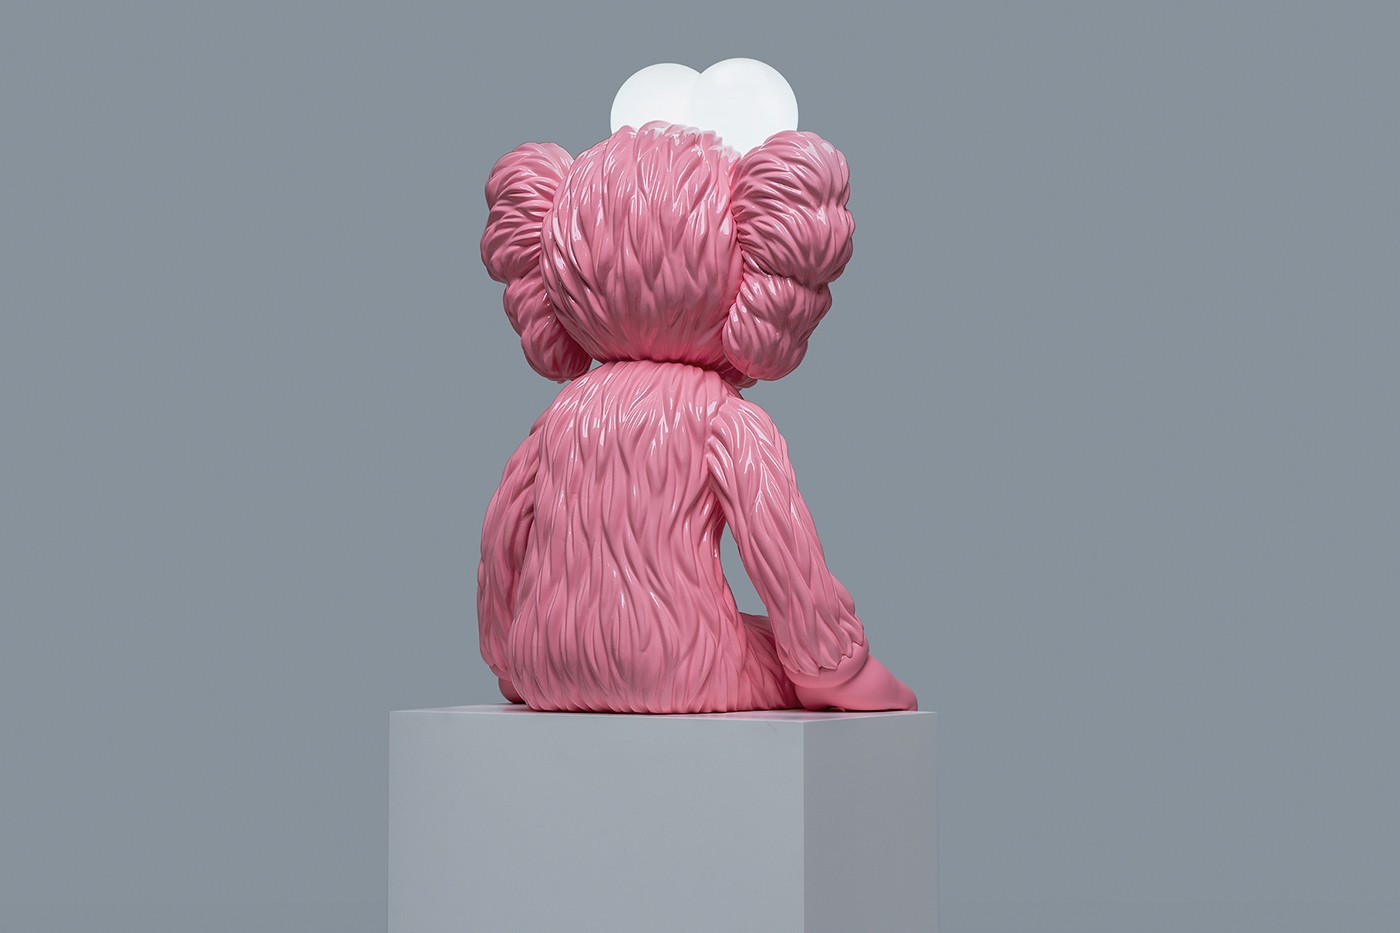 KAWS x AllRightsReserved's pink 